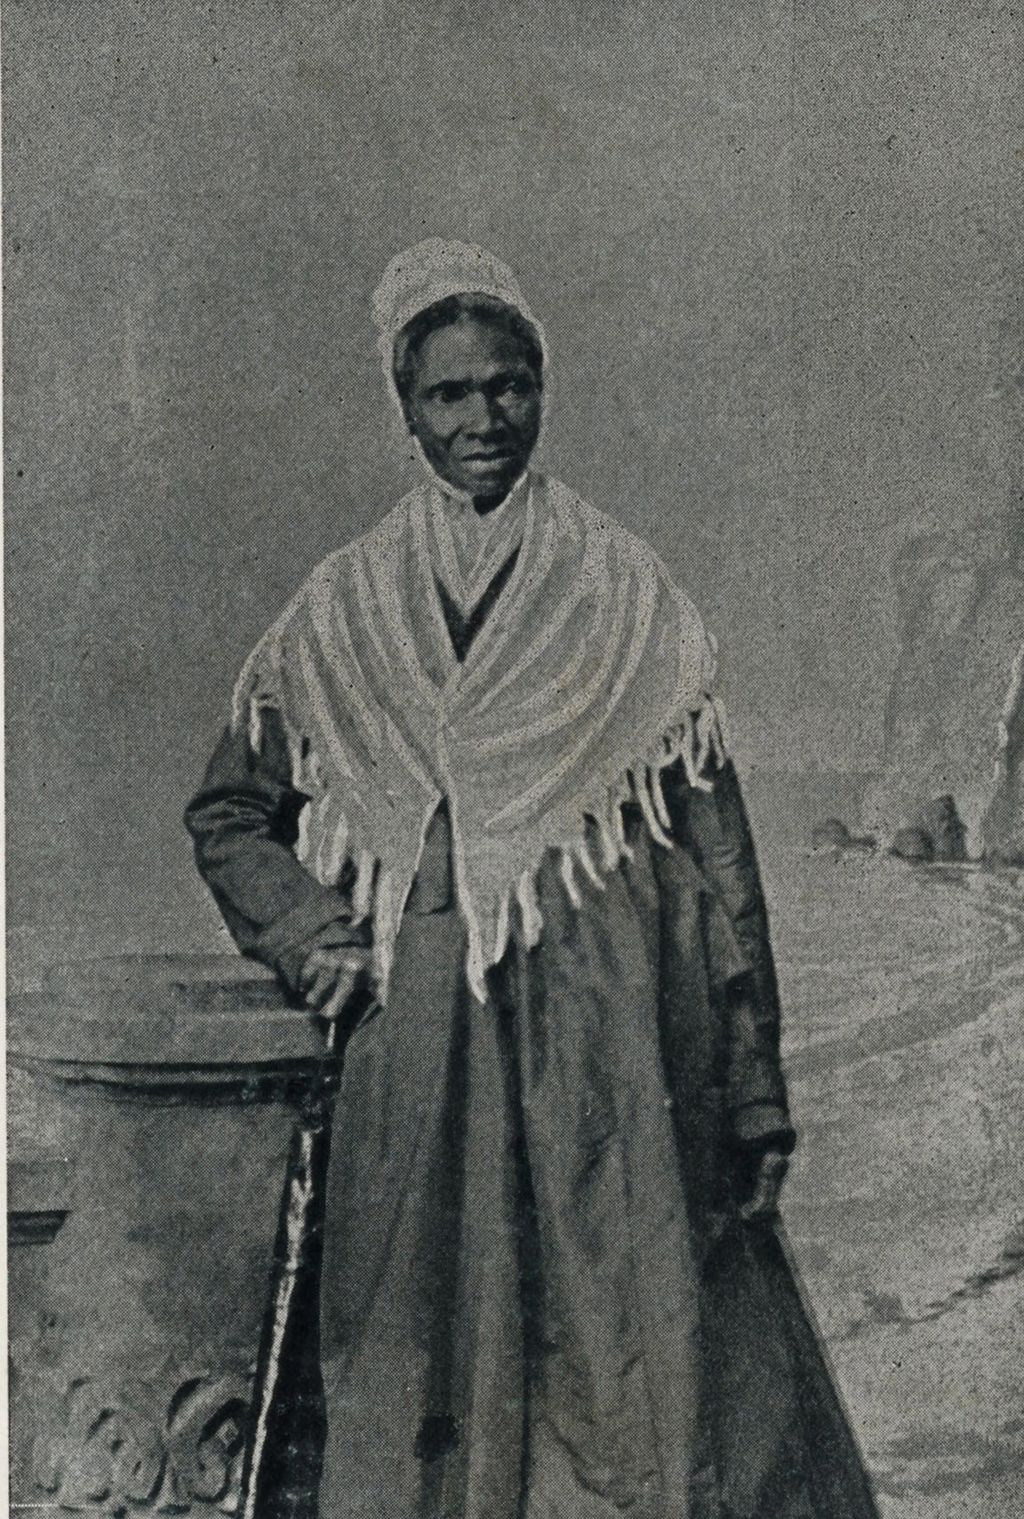 Sojourner Truth, African American abolitionist and champion of women's rights. Born into slavery as Isabella Baumfree (1797-1883) she escaped to freedom in 1826. Changed her name in 1843.